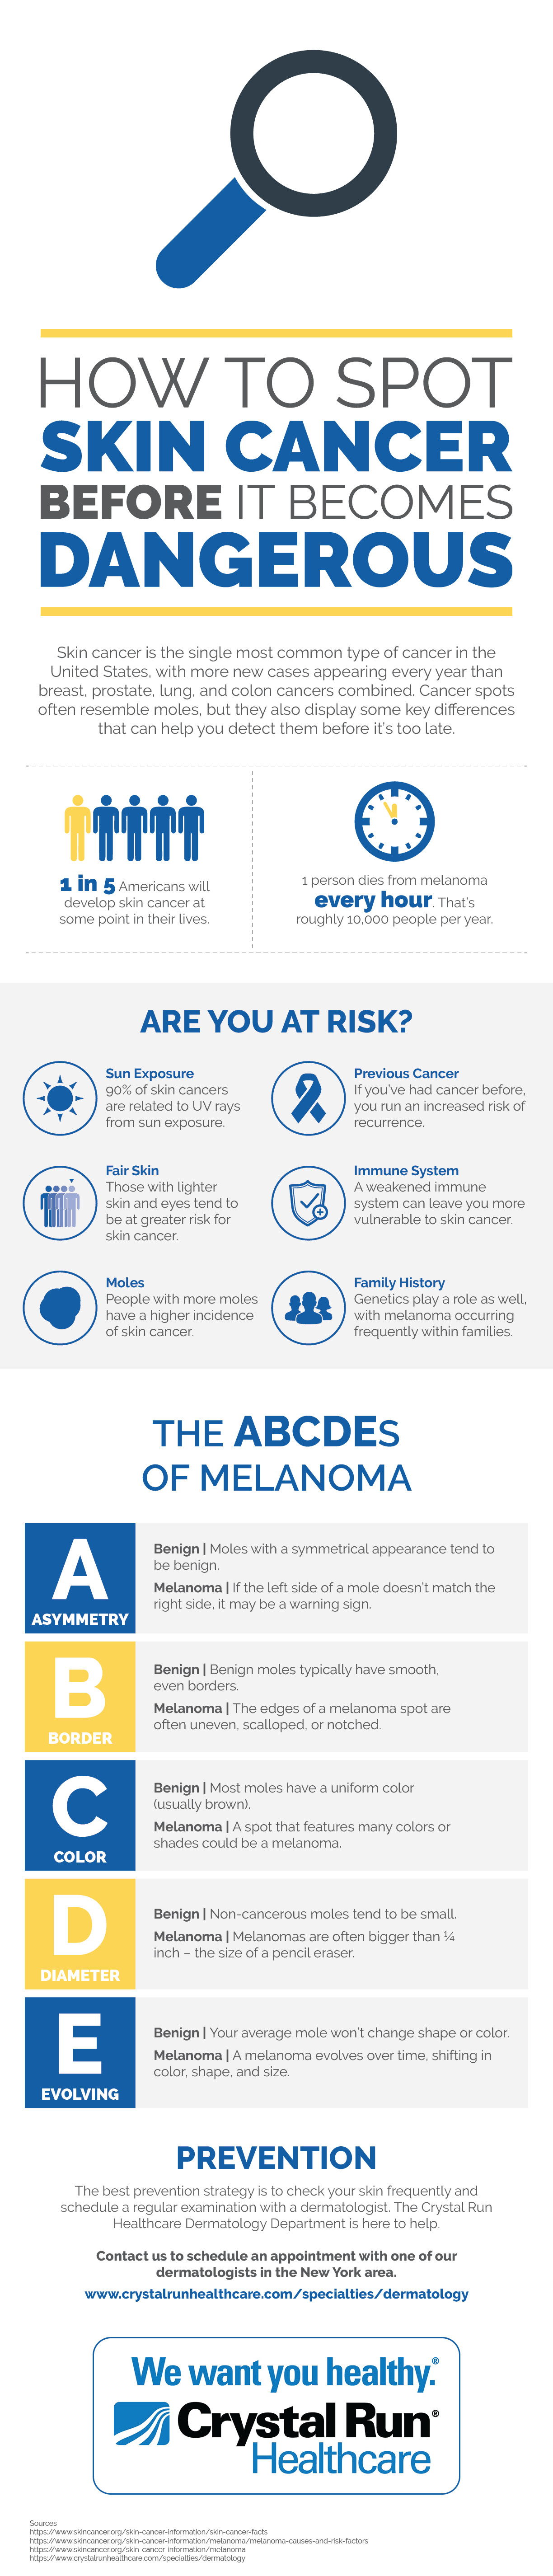 How to Spot Skin Cancer Before It Becomes Dangerous Infographic